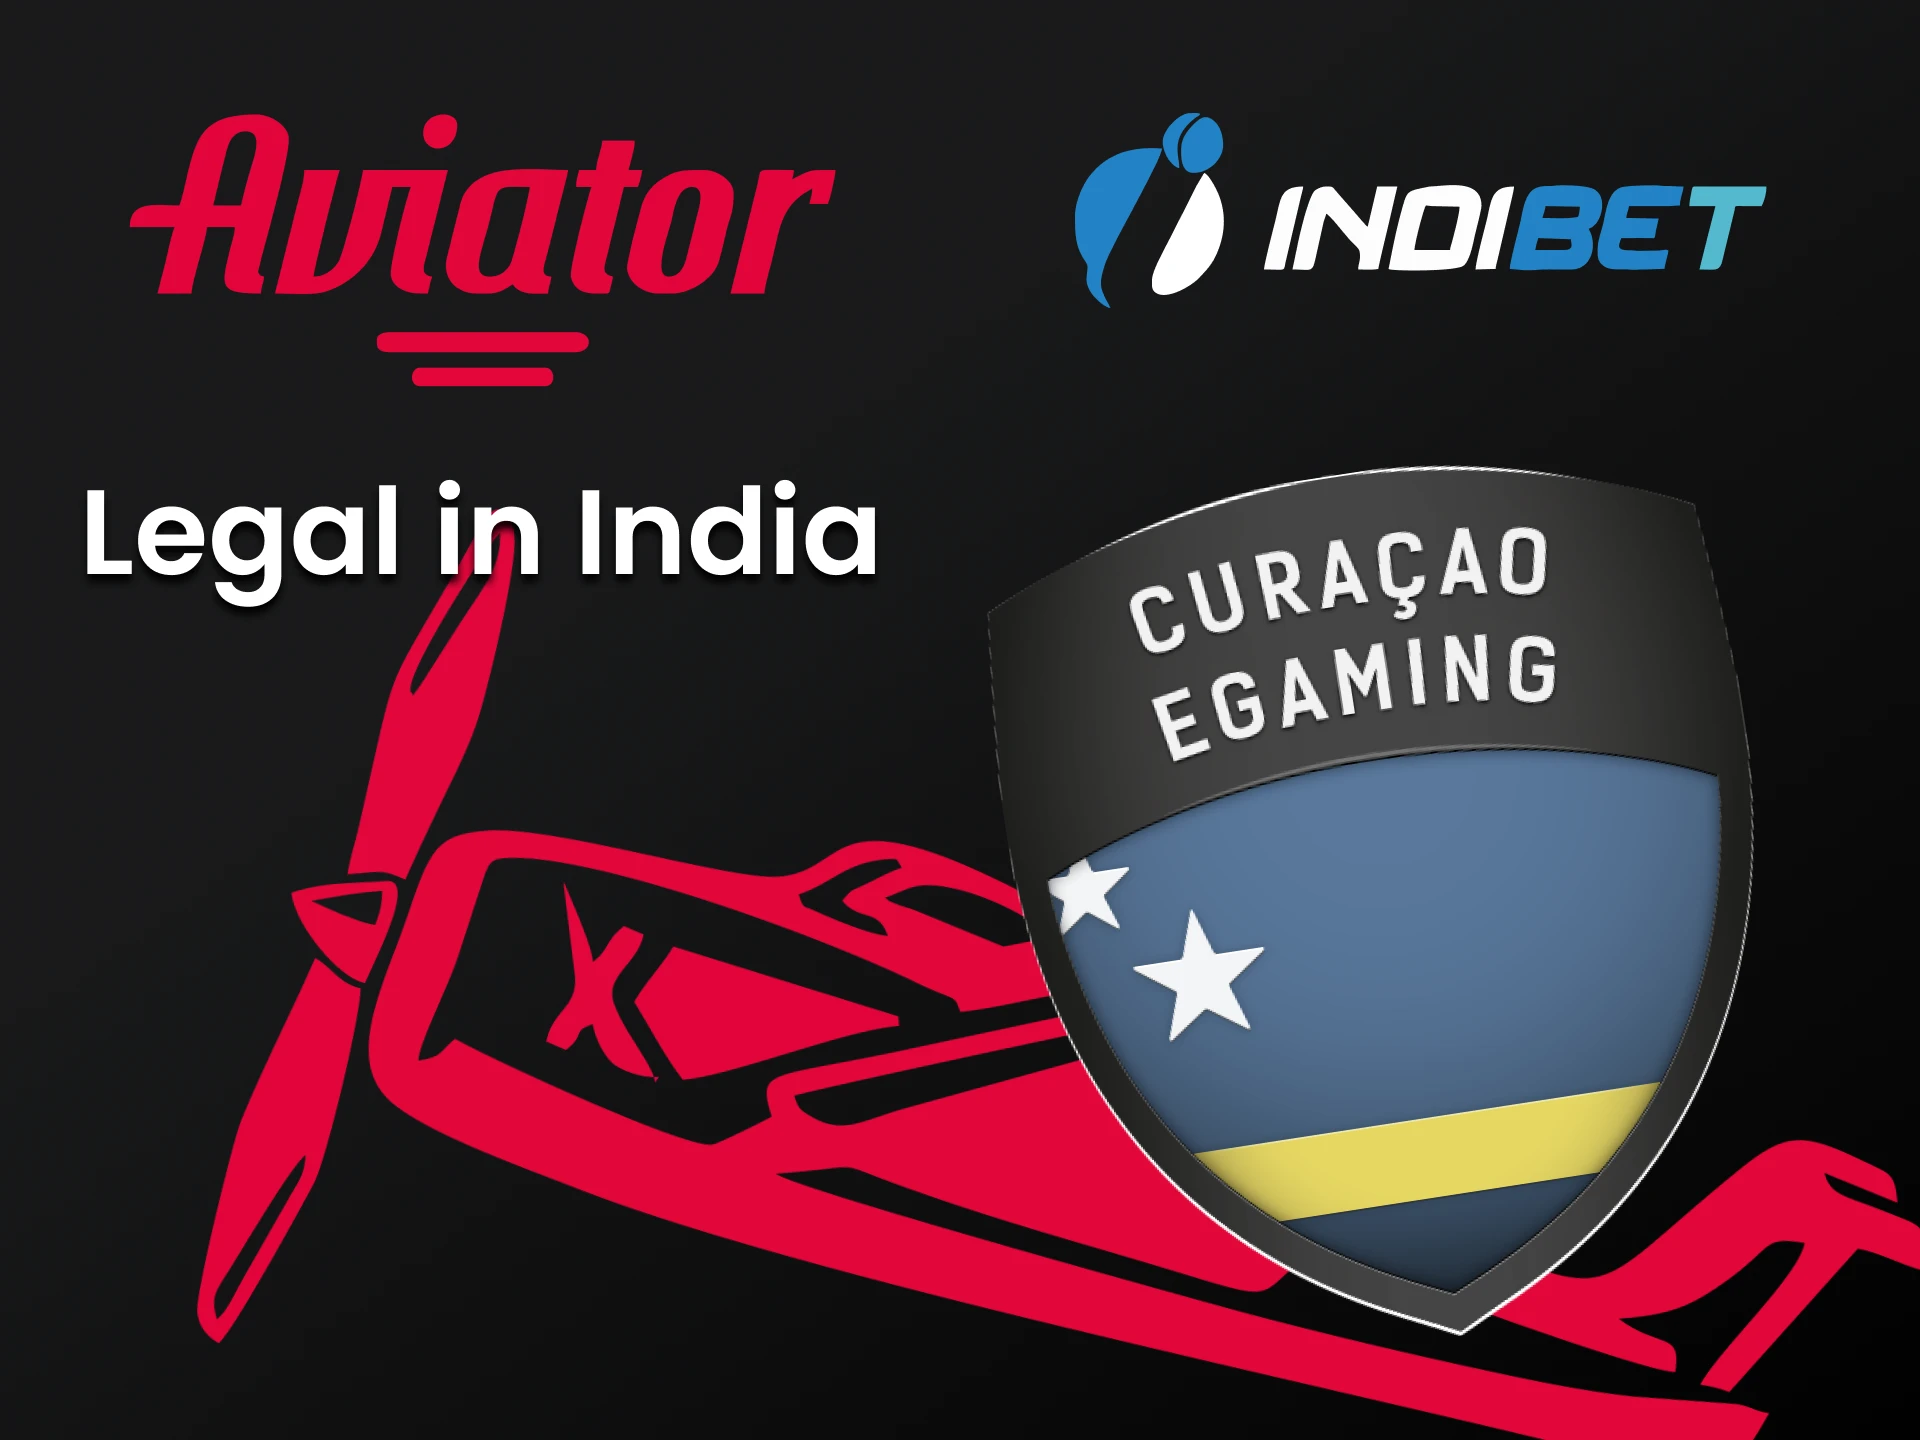 It is legal to play Aviator on Indibet.